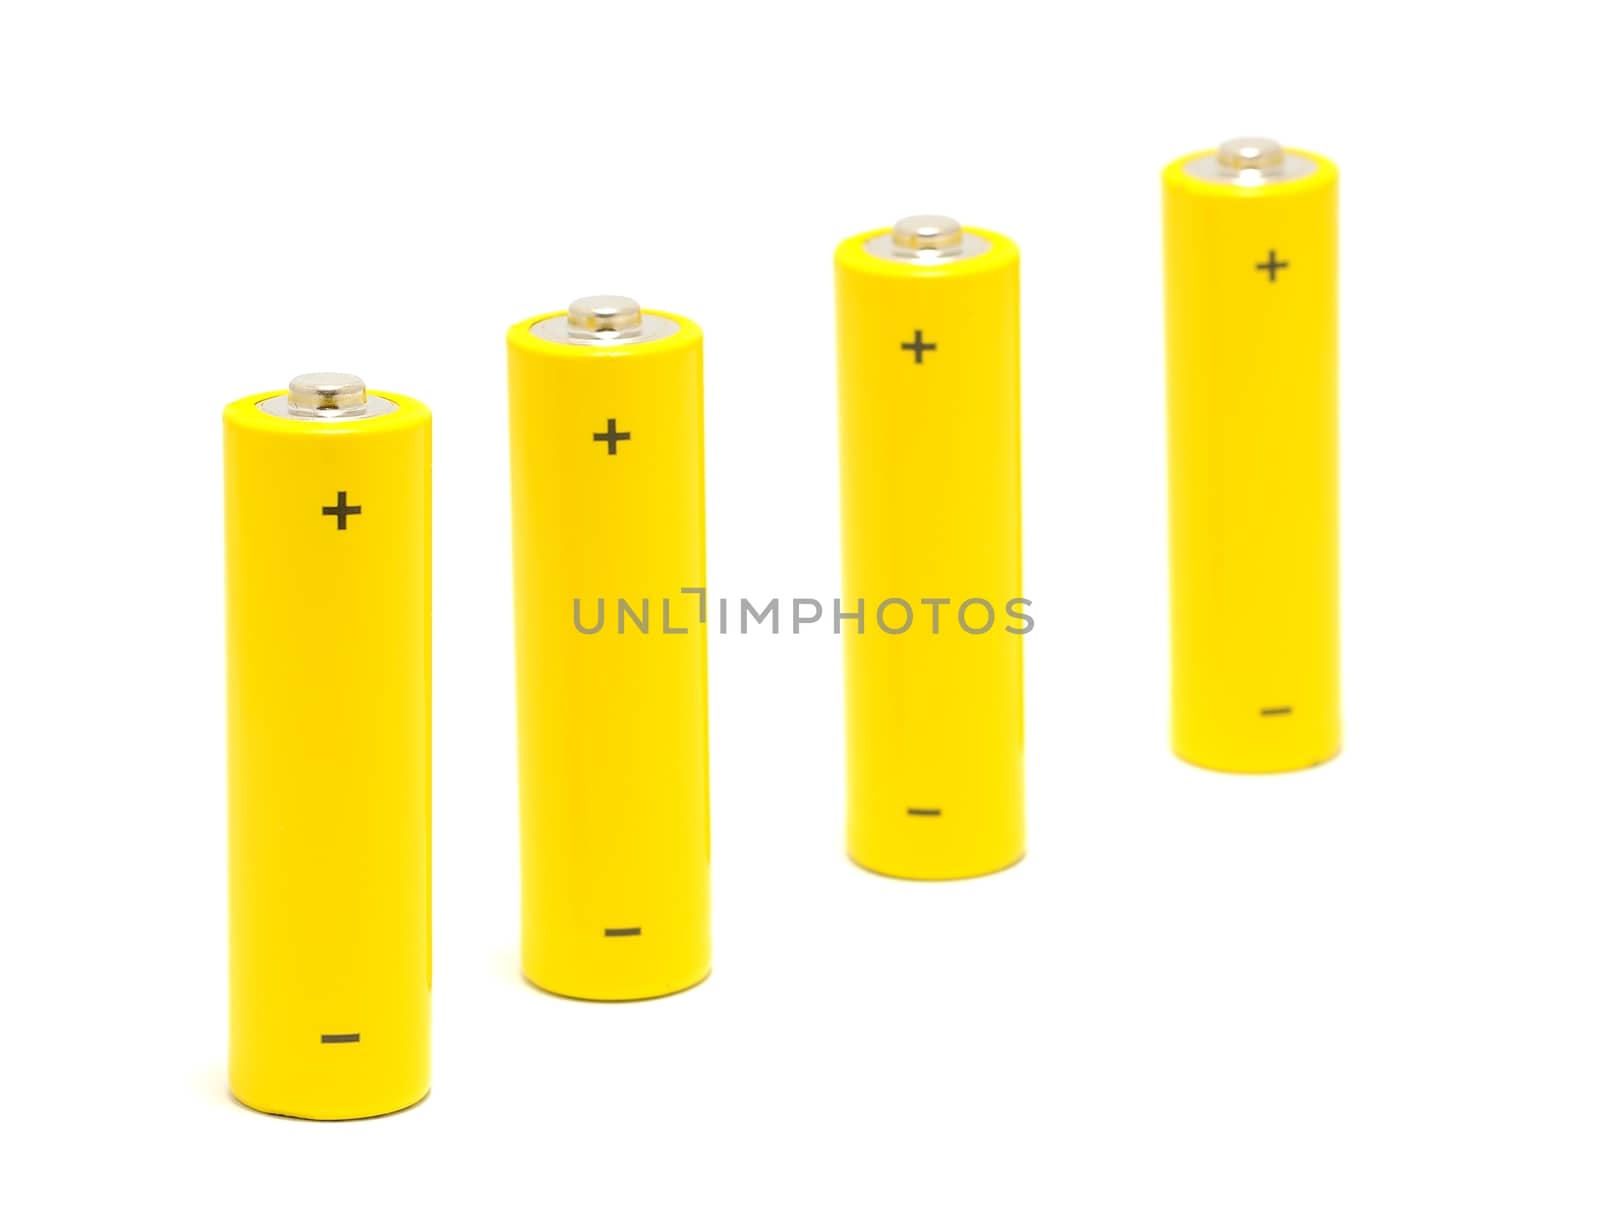 Row of yellow AA size batteries on a white background.